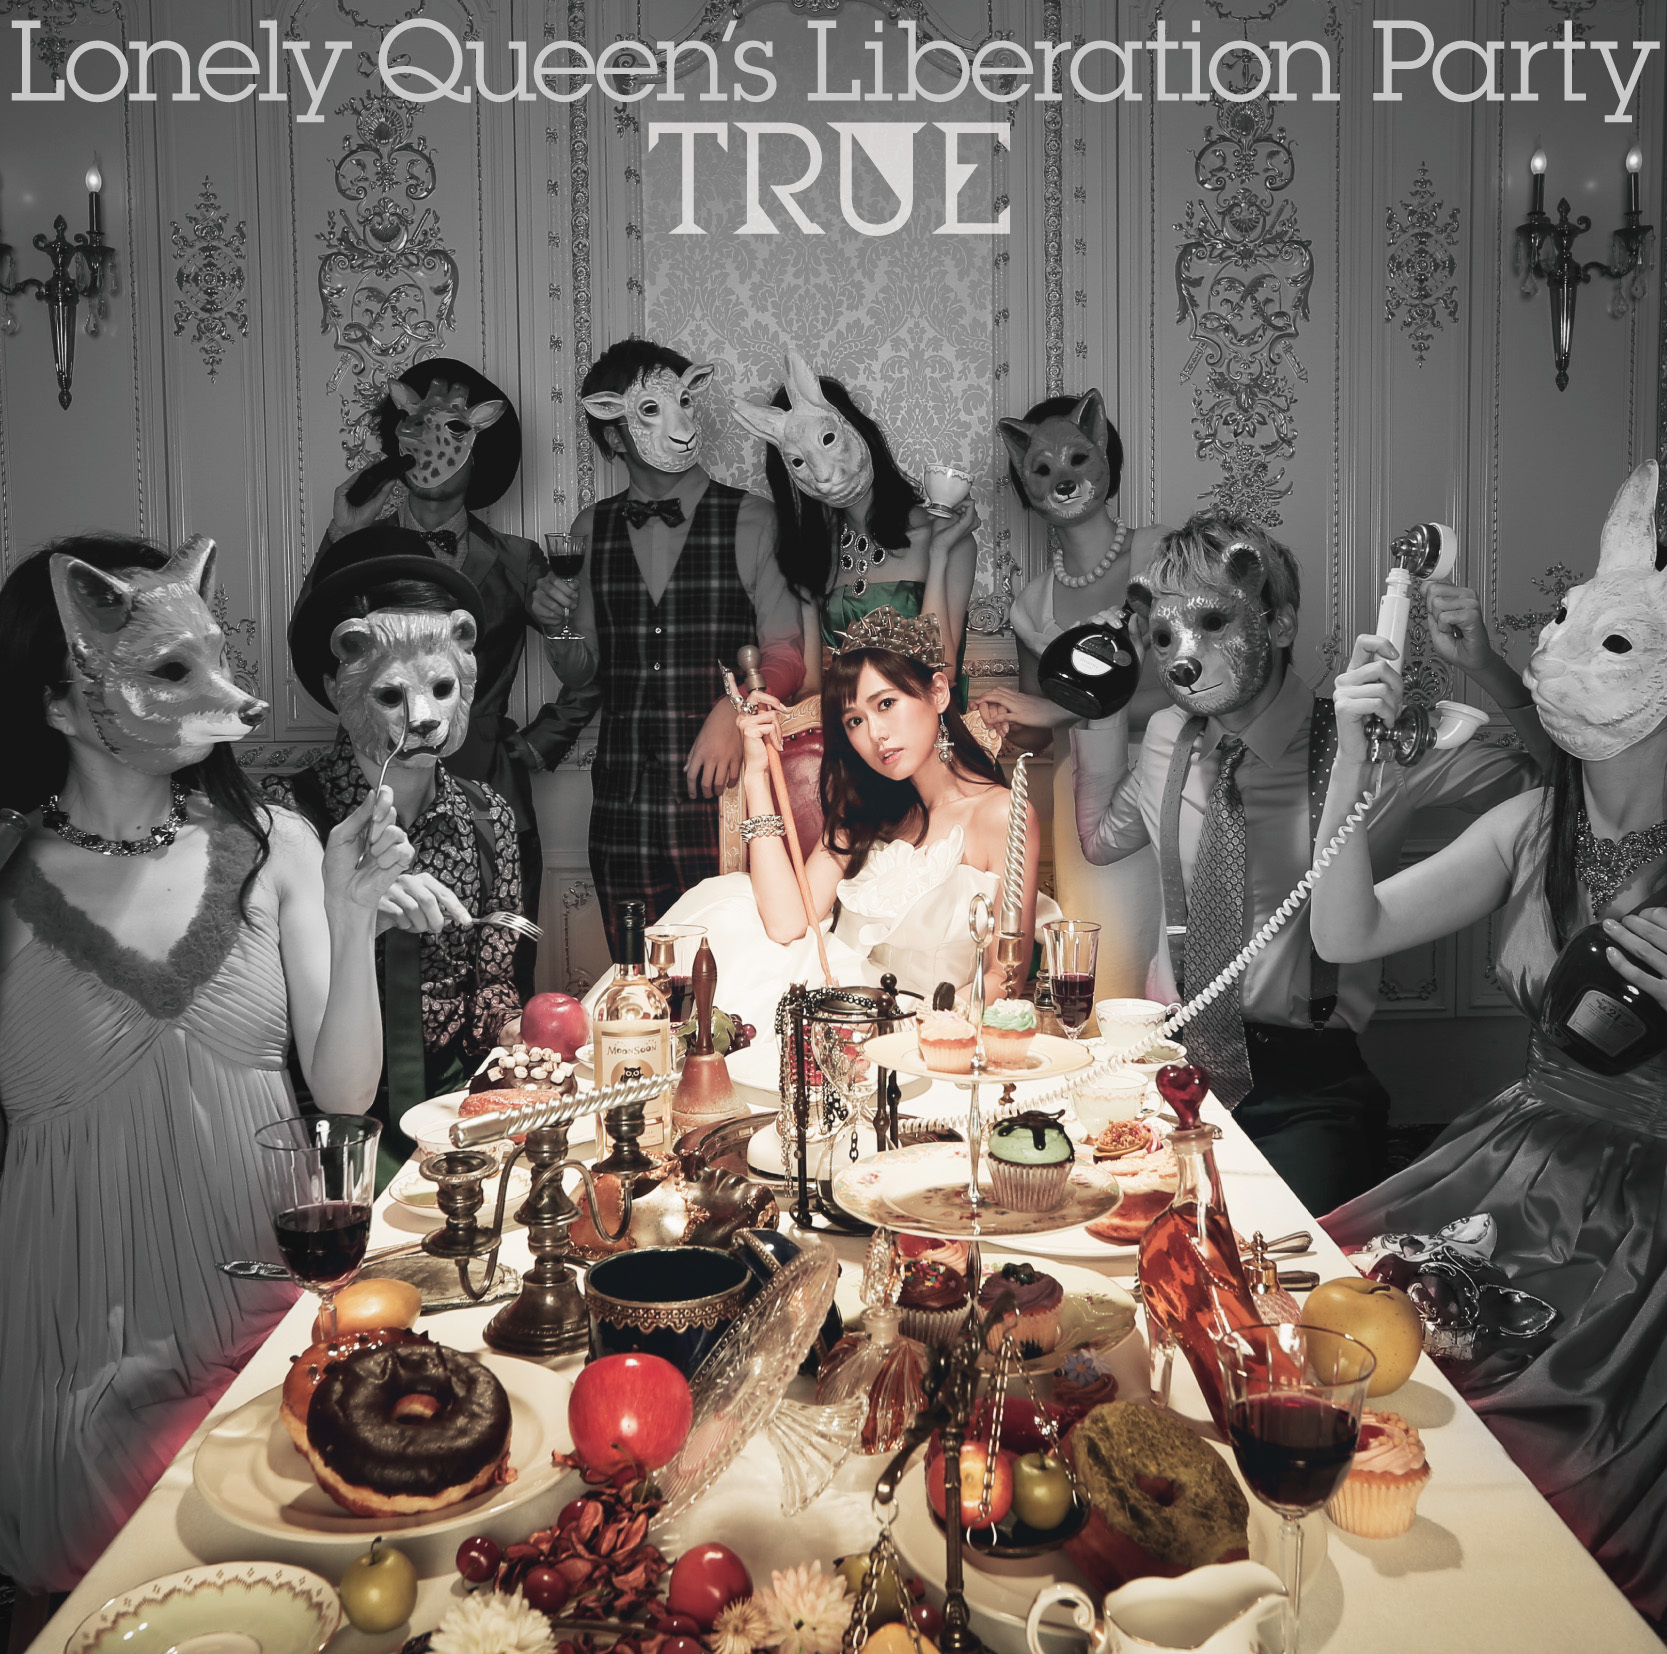 Lonely Queen’s Liberation Party